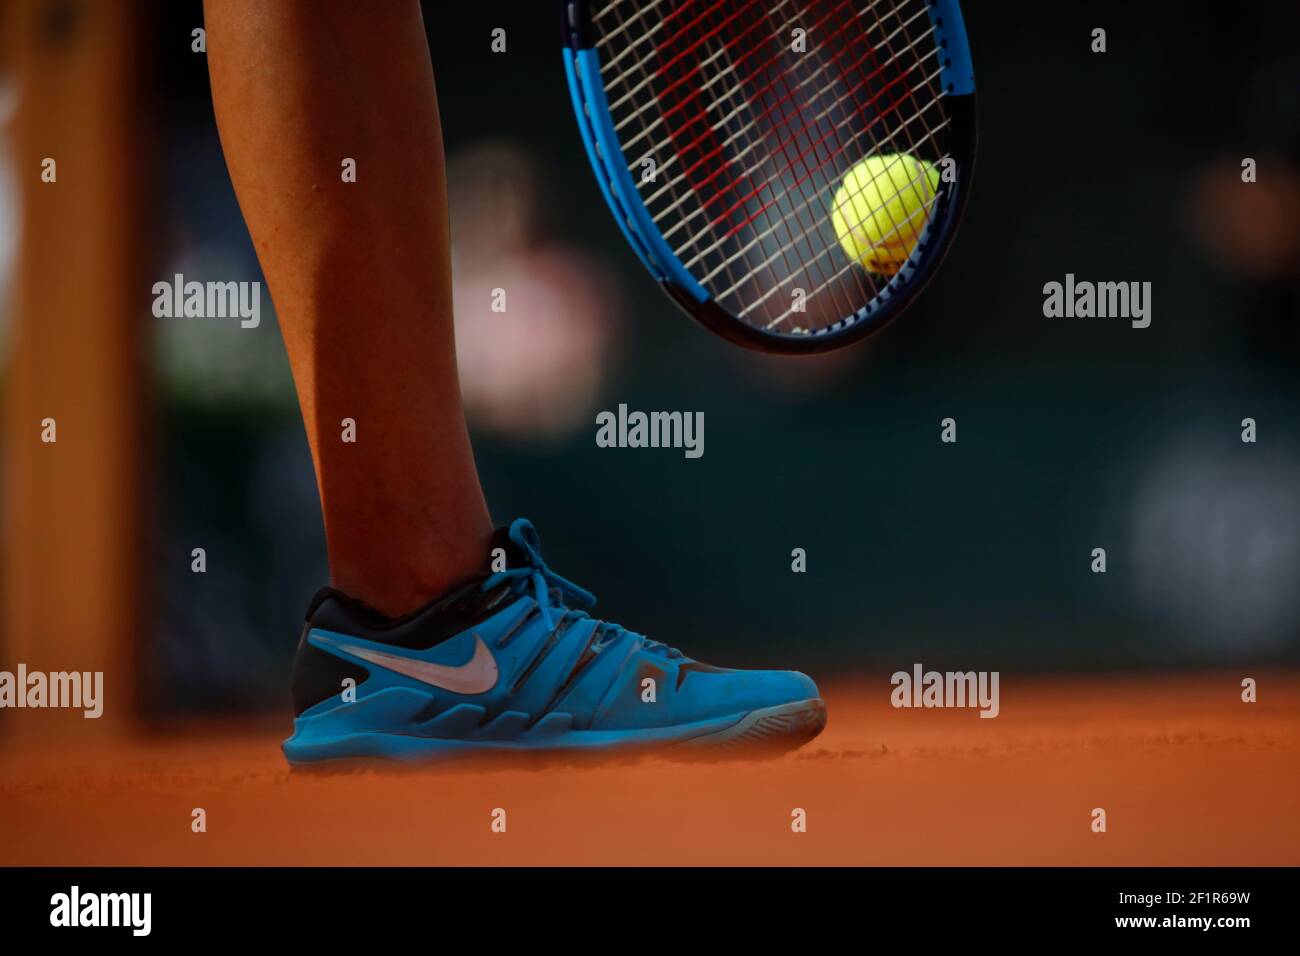 Illustration of Nike shoes, Wilson racket and tennis ball of Madison KEYS  (USA) at service during the Roland Garros French Tennis Open 2018, day 12,  on June 7, 2018, at the Roland